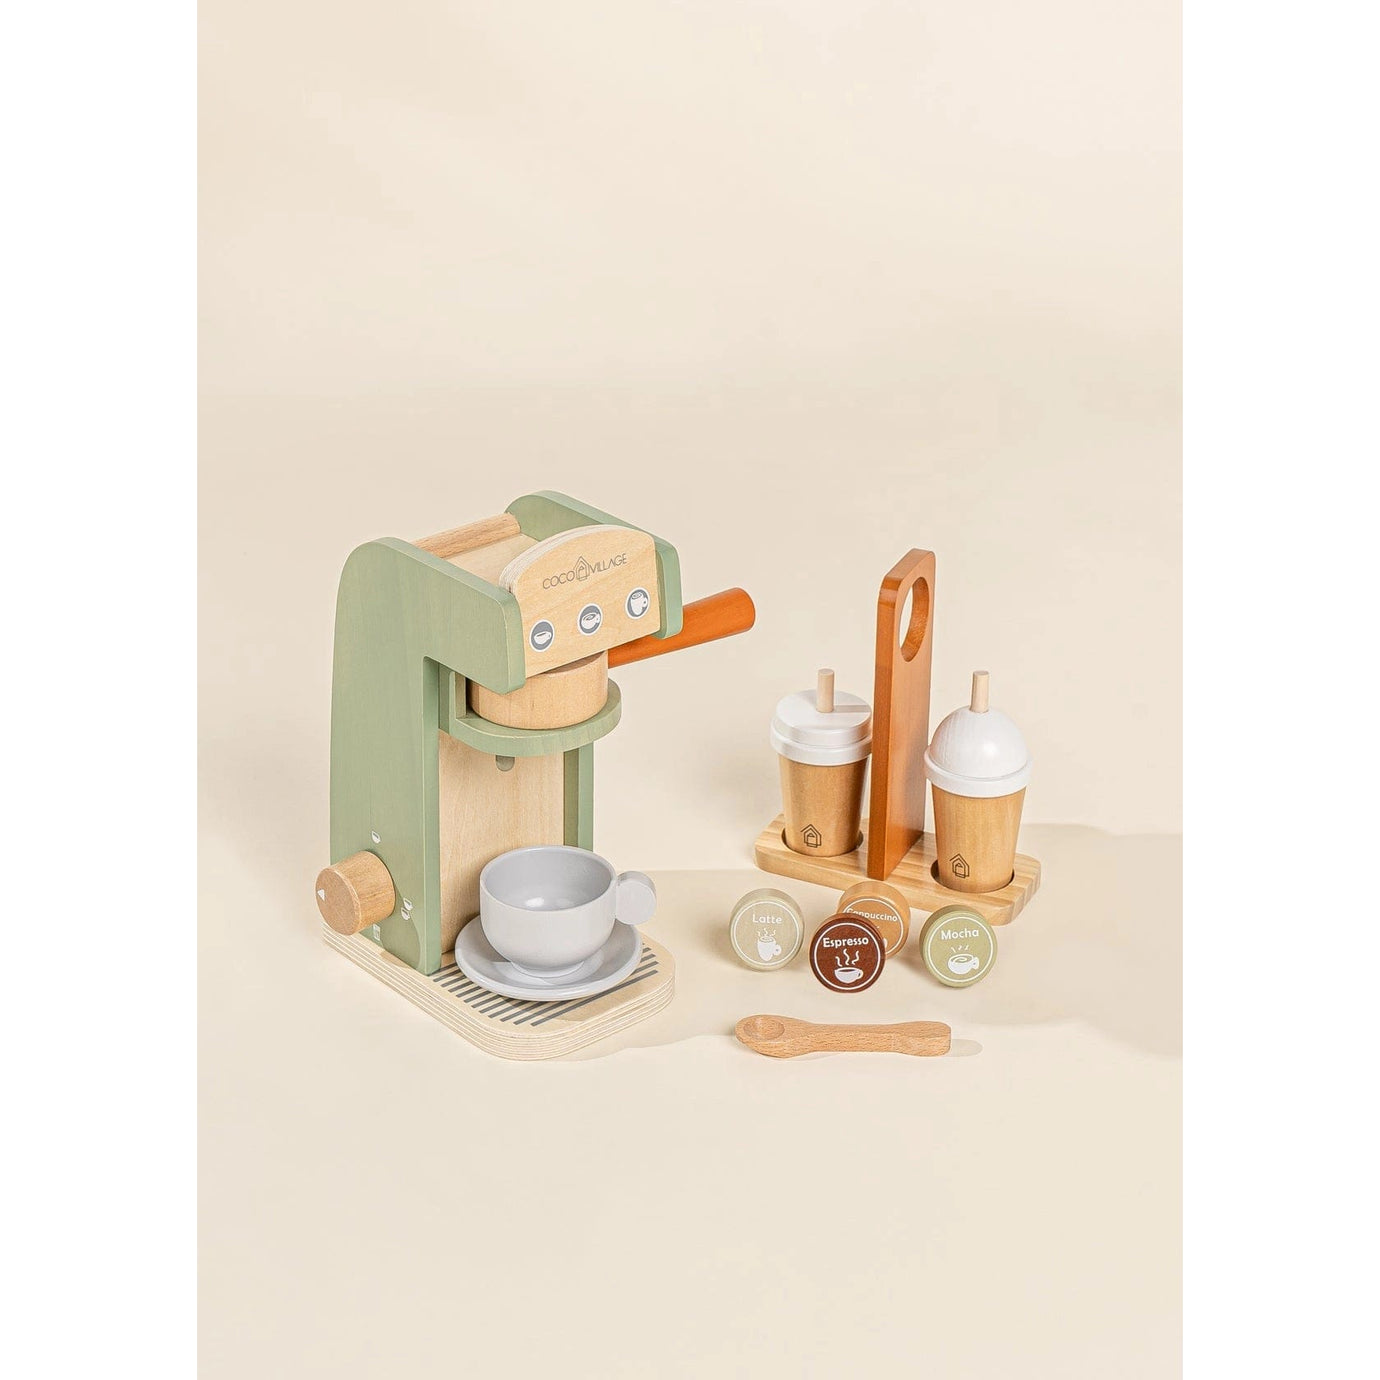 Wooden Coffee Maker Set Coco Village Lil Tulips